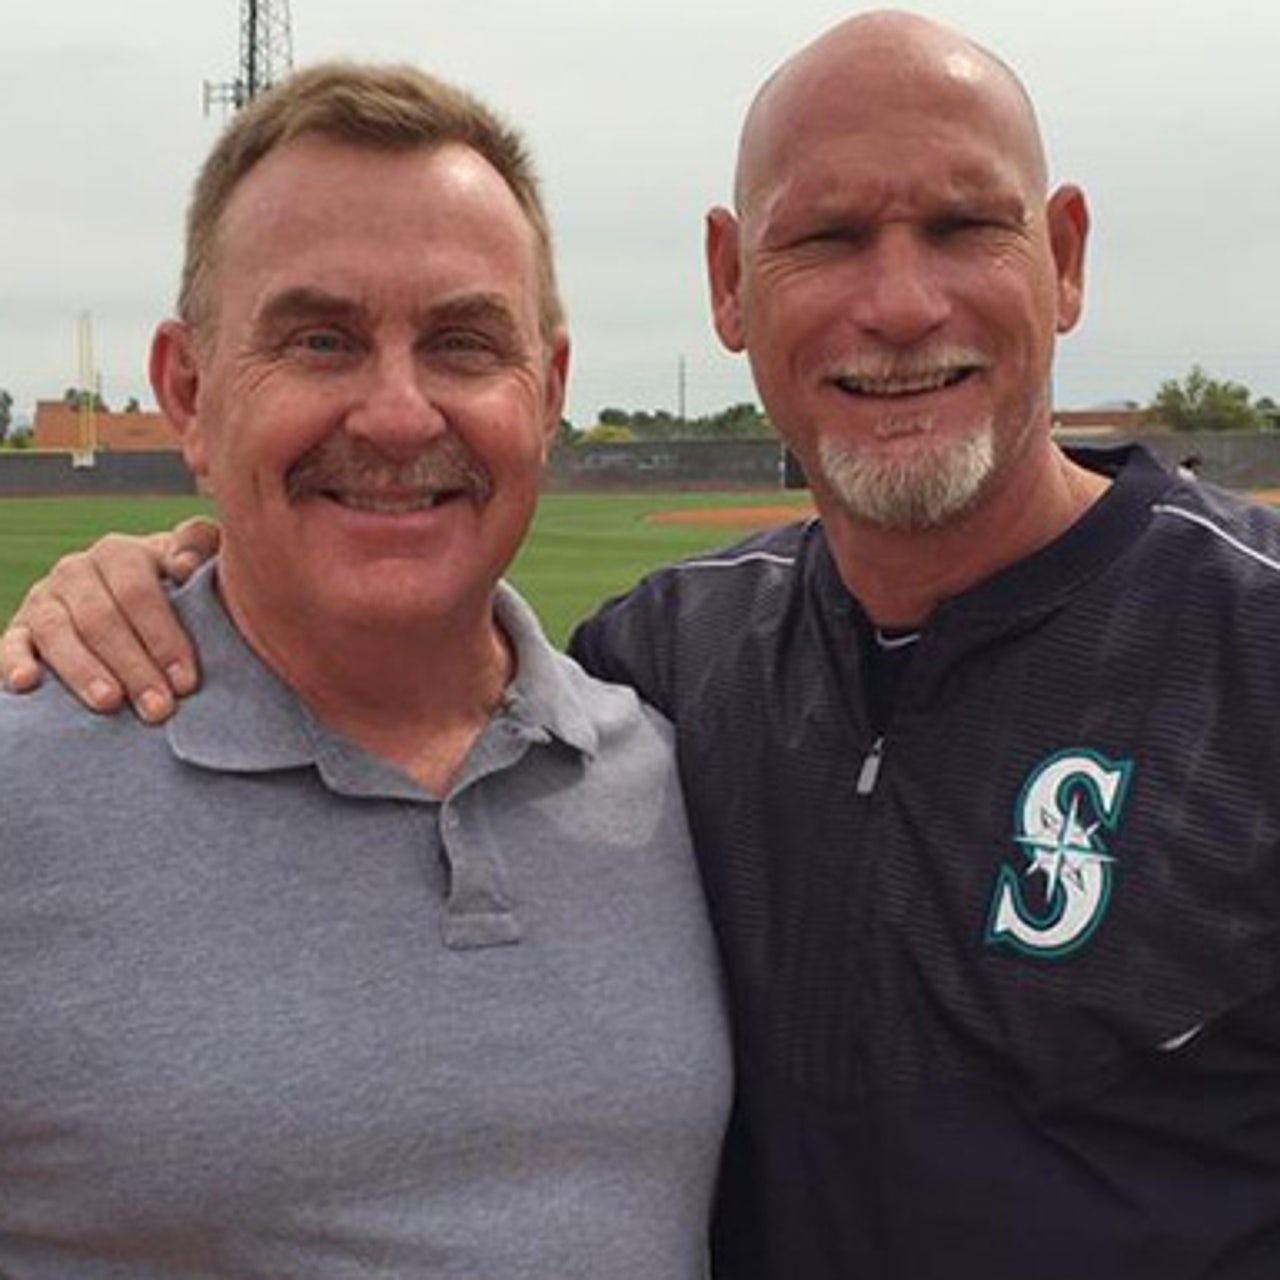 Jay Buhner, Ken Phelps reminisce about epic 'Seinfeld' moment